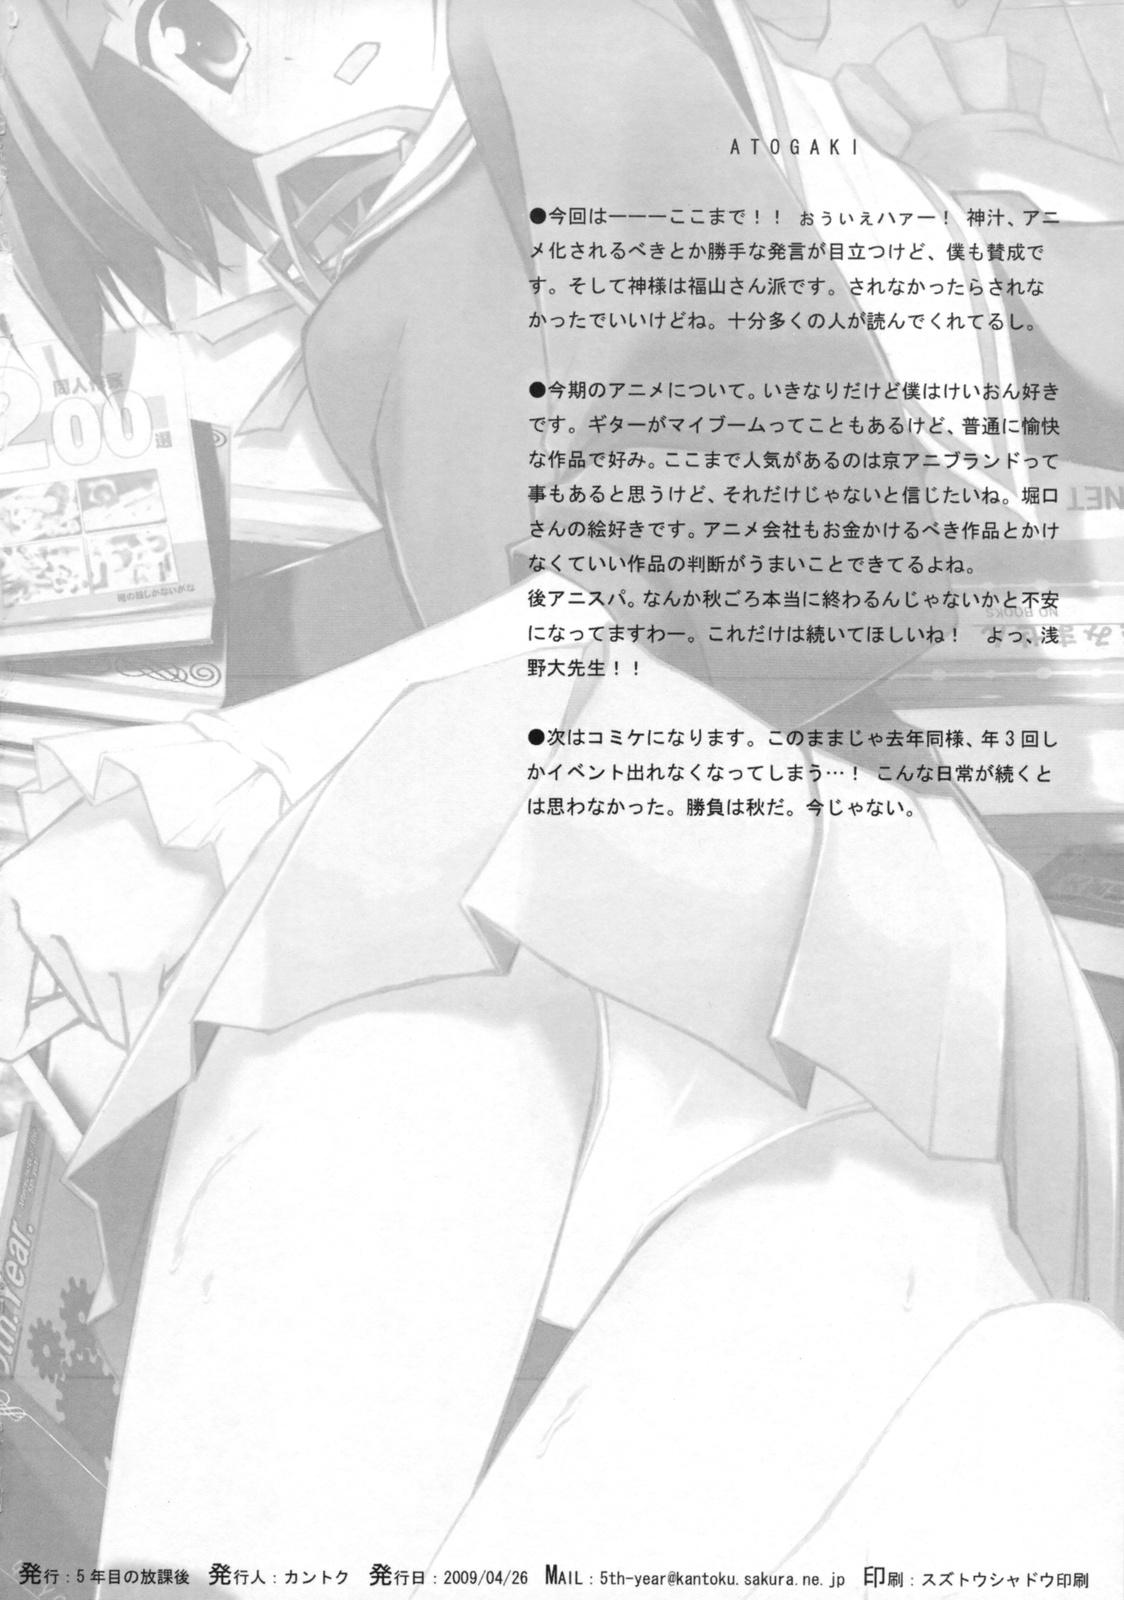 Skype Tachiyomi Senyou Vol. 28 - The world god only knows Glasses - Page 21